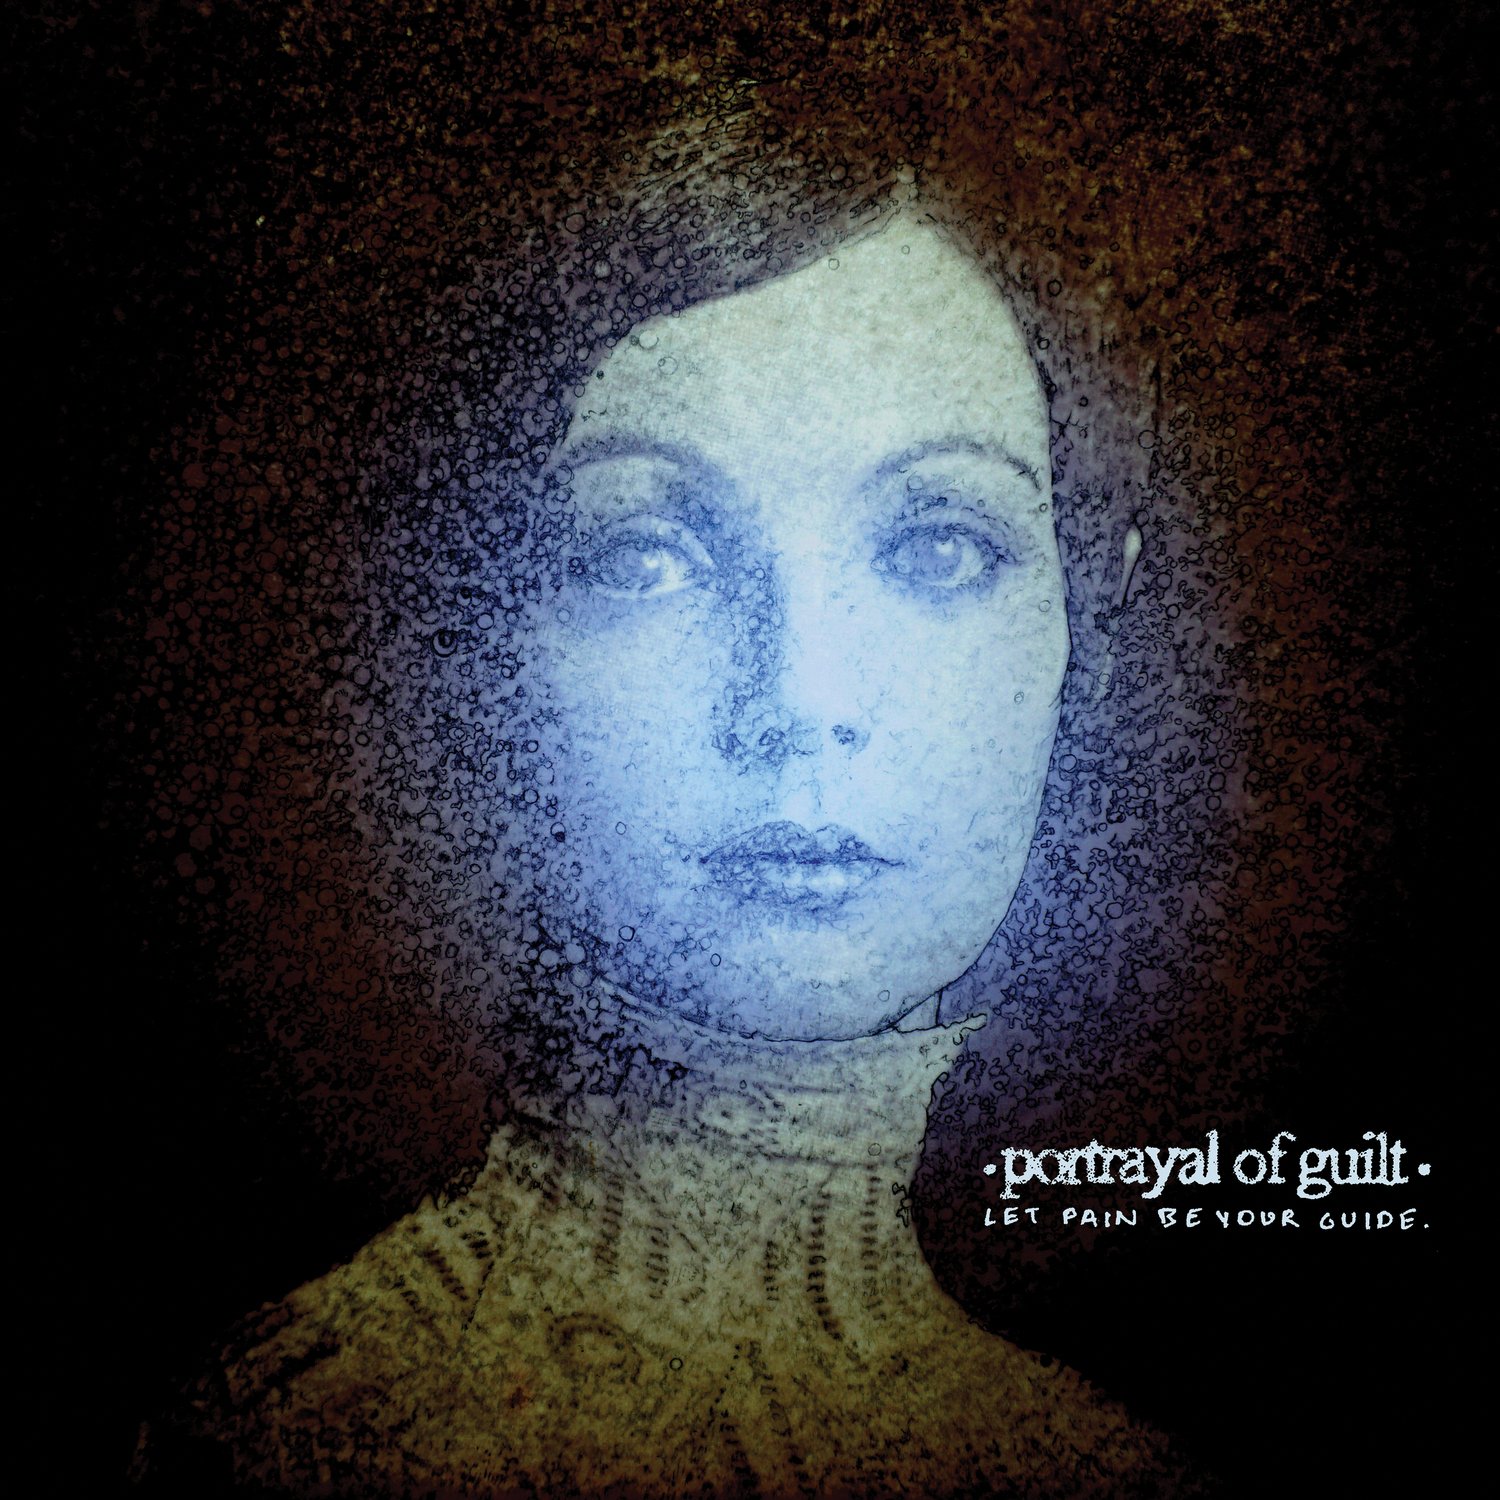 Portrayal Of Guilt - Let Pain Be Your Guide (2018) FLAC Download